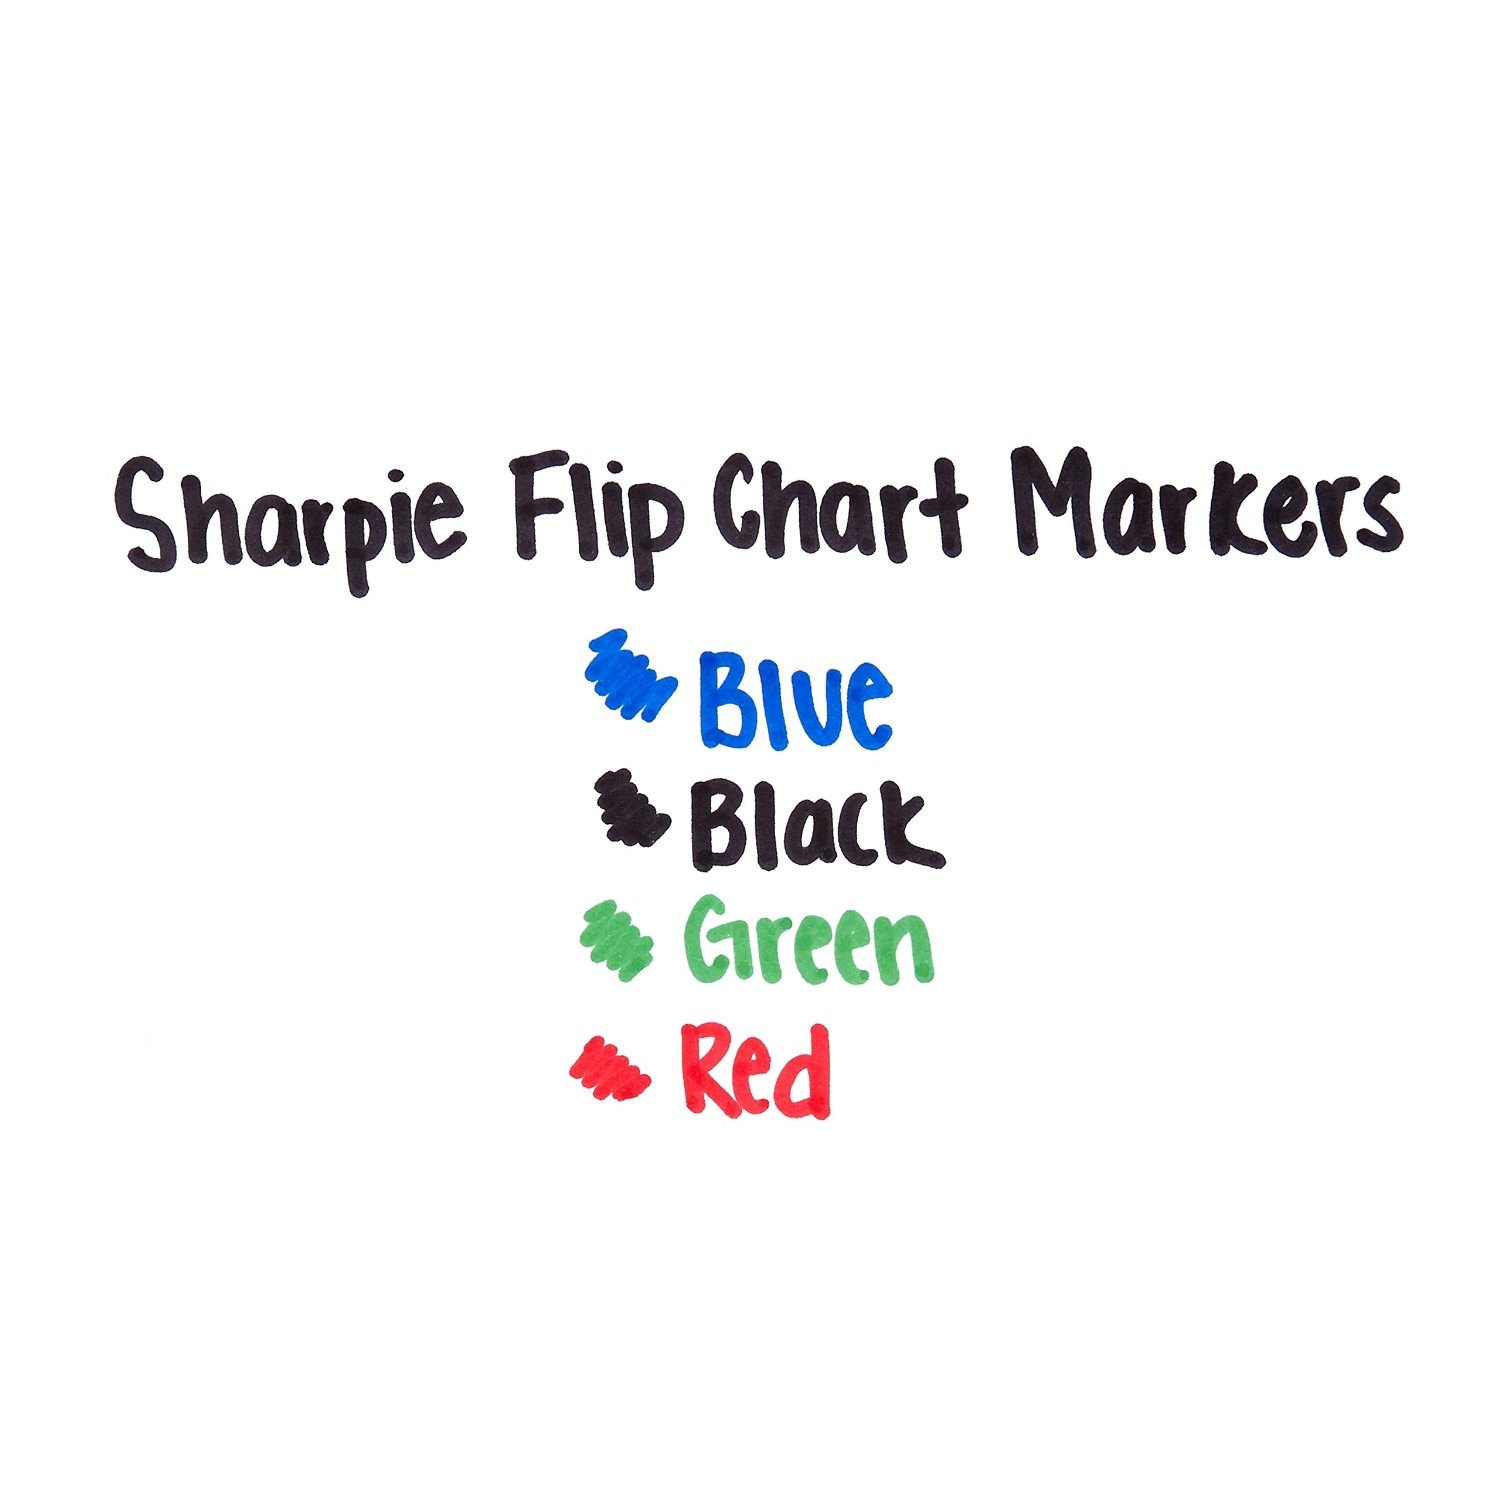 Lowest Price: SHARPIE Flip Chart Markers, Bullet Tip